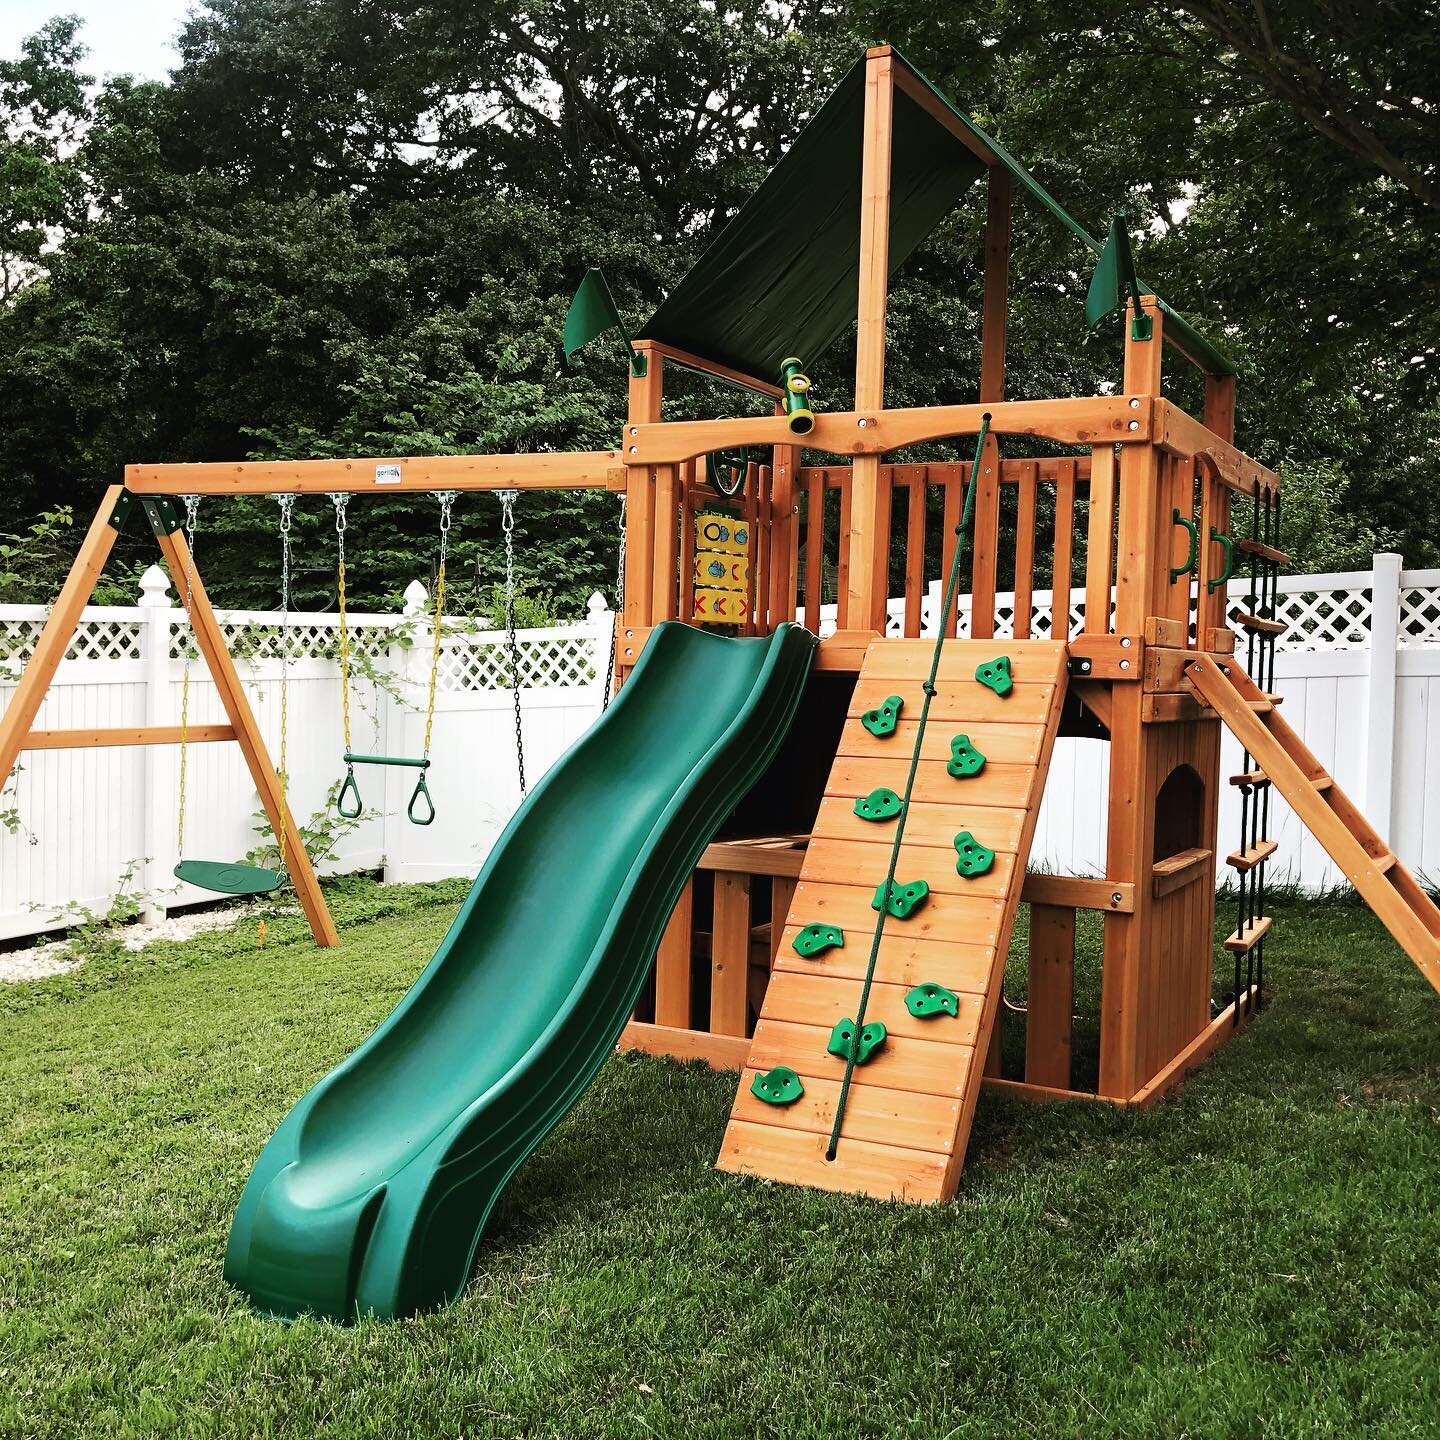 Some mo&rsquo; Gorilla stuff. Chateau with clubhouse lower, and an Outing. 

#gorillaplaysets #strongarmofthelawn #playsetinstallation #swingsetinstallation #playgrounds #playset #swingset #playgroundinstallation #gorillaplaysets #playsetassembly #sw